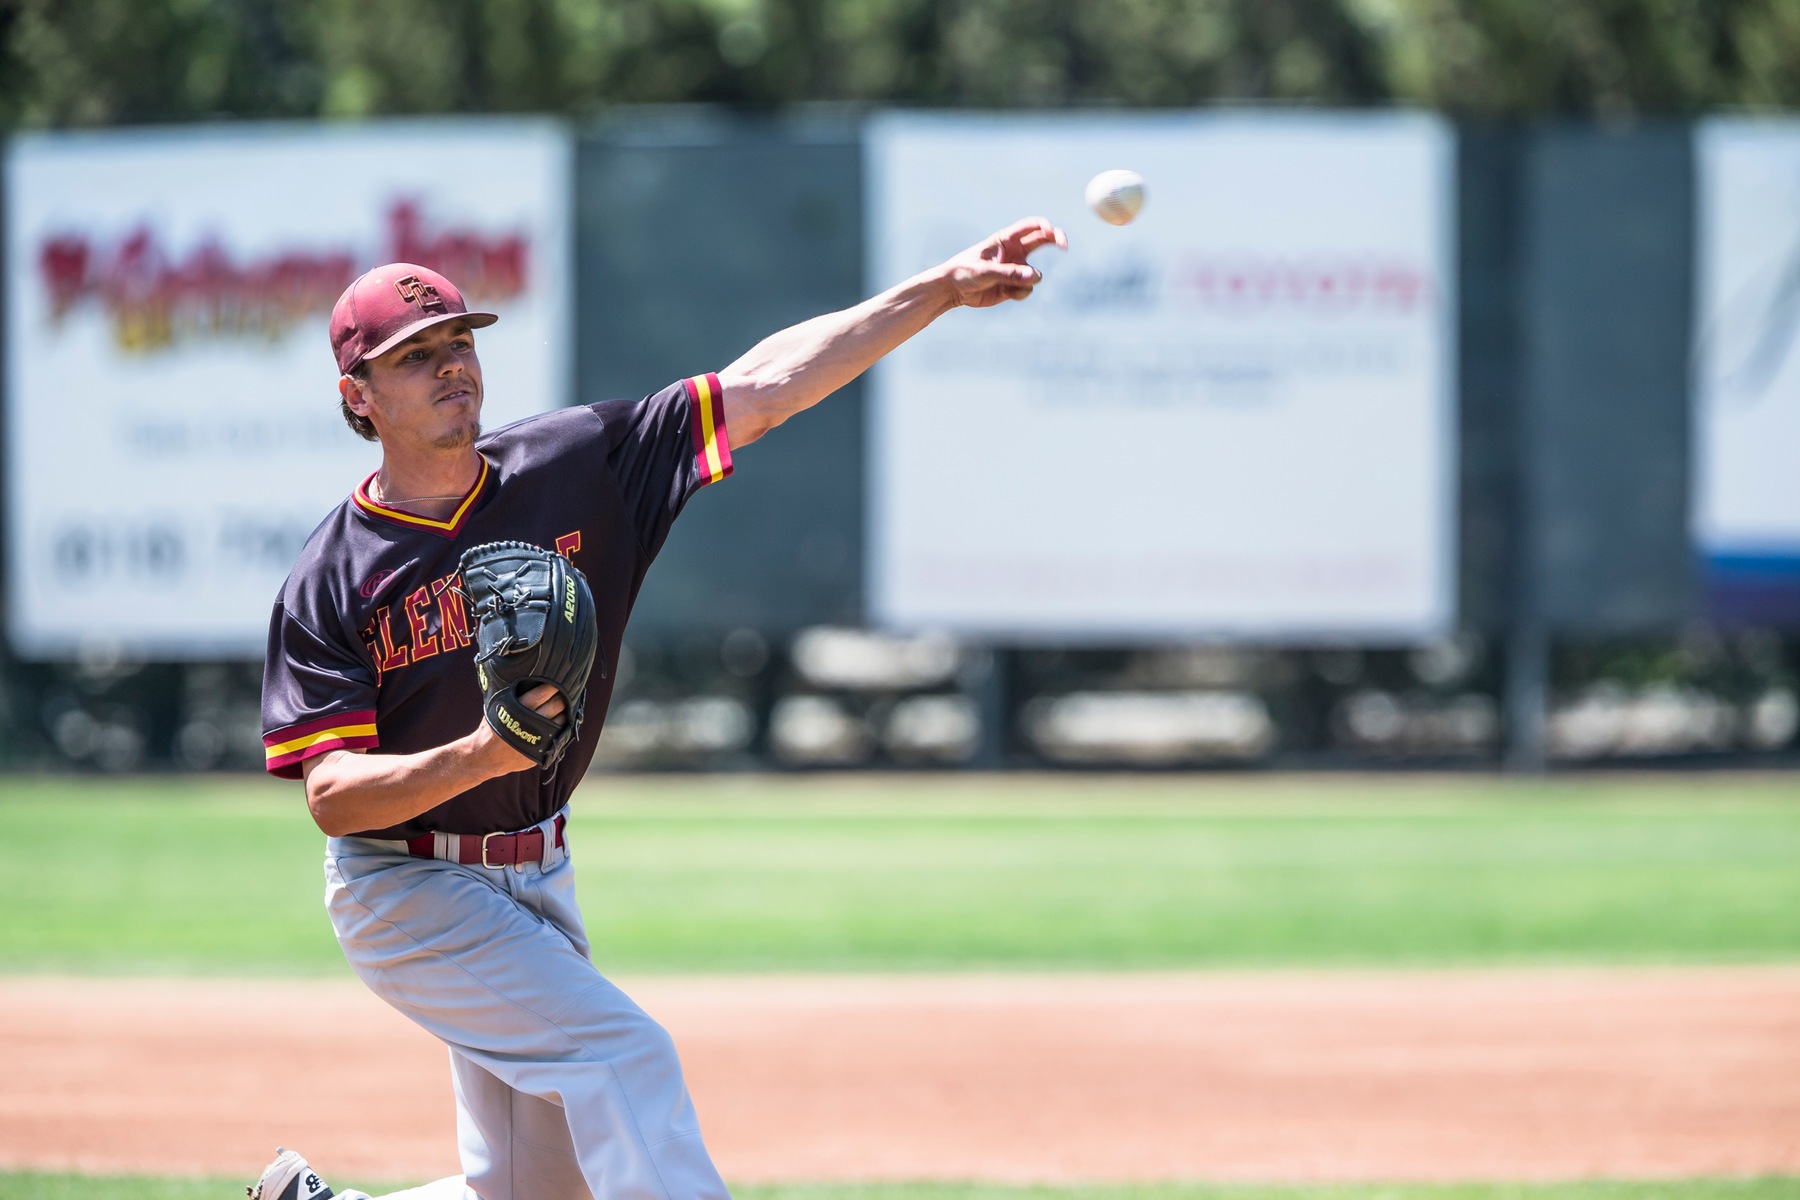 Chris Davidson Gets a Complete Game Win and a Save Over PCC; GCC Faces Mt. SAC Next in Playoffs